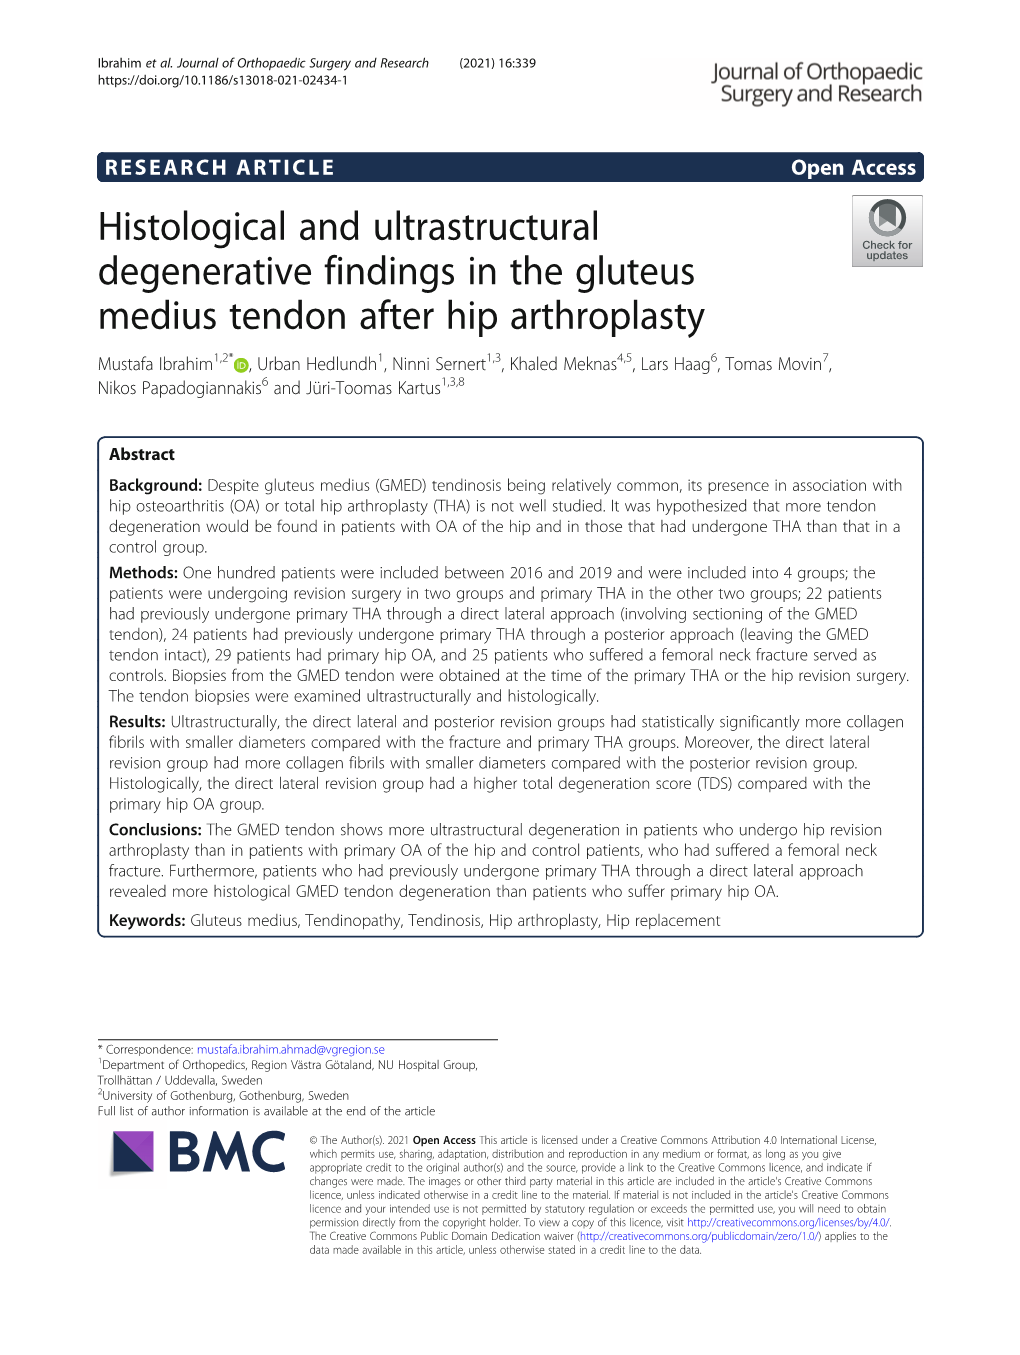 Histological and Ultrastructural Degenerative Findings in the Gluteus